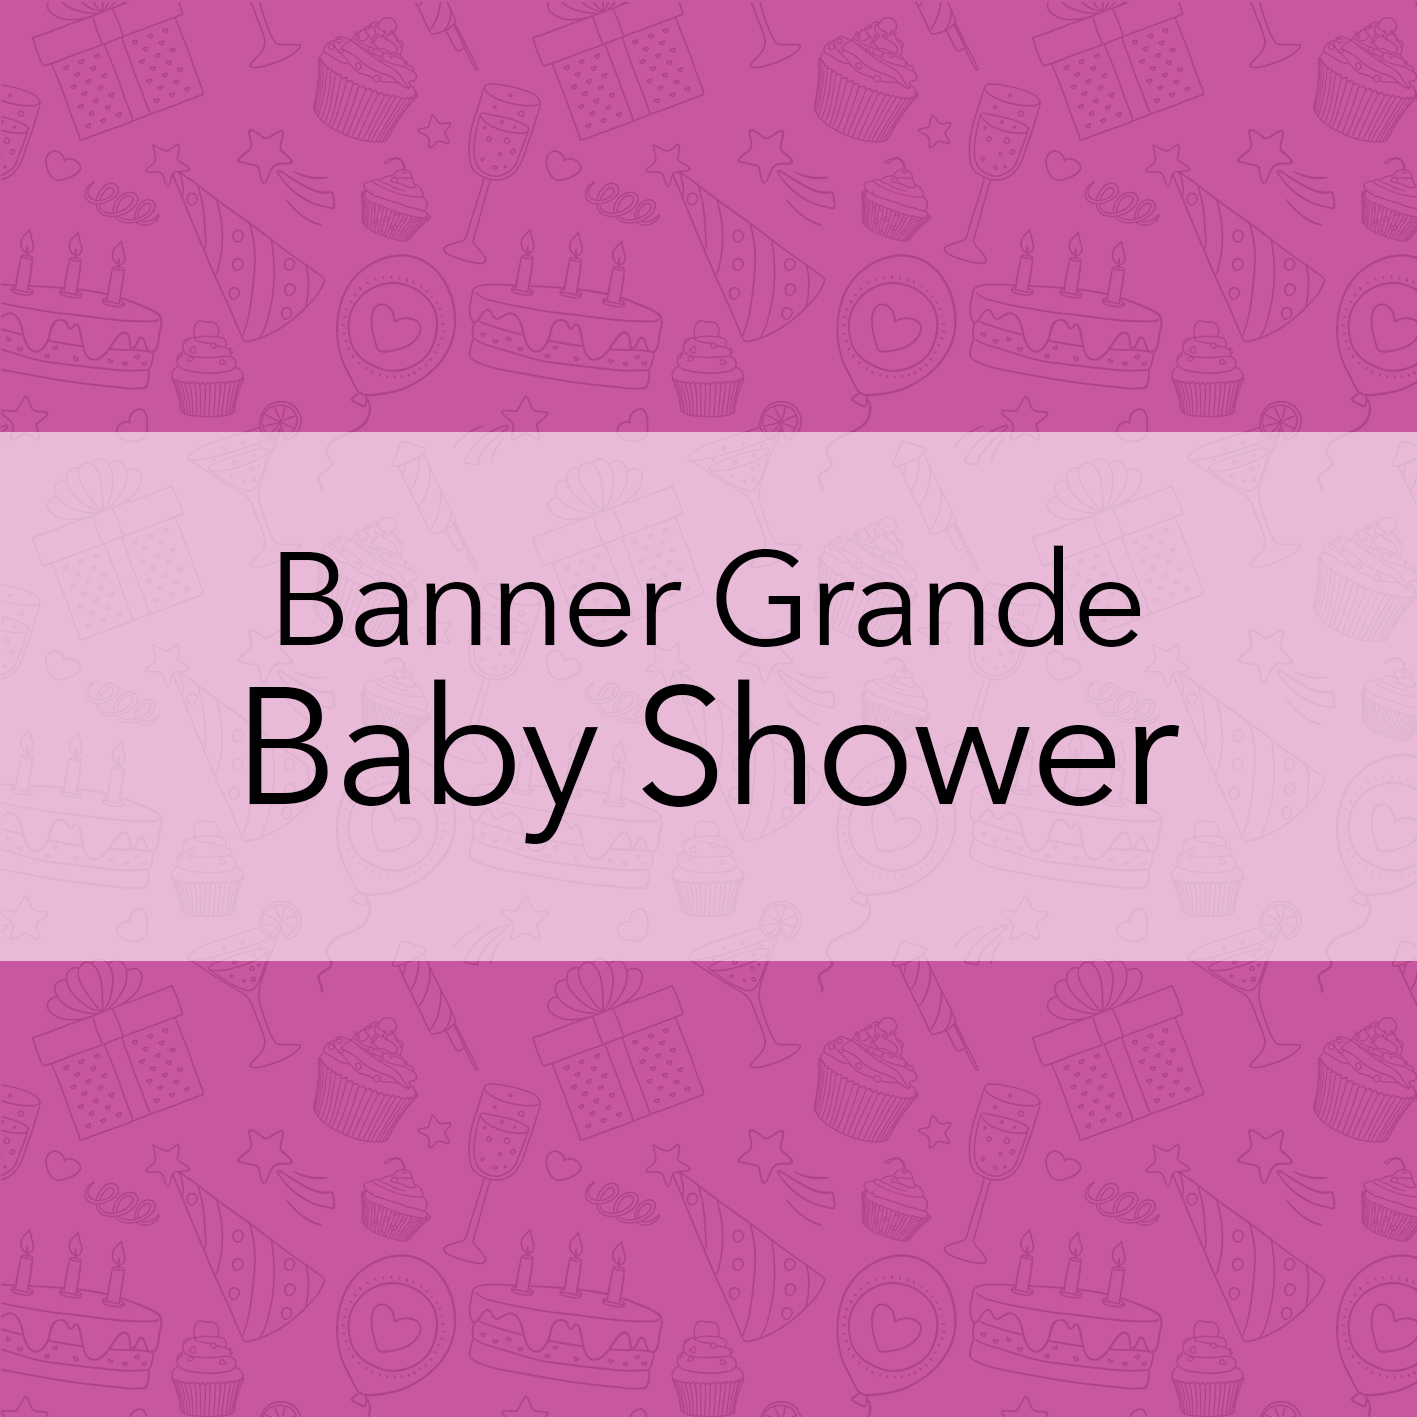 BANNERS GRANDES - BABY SHOWER